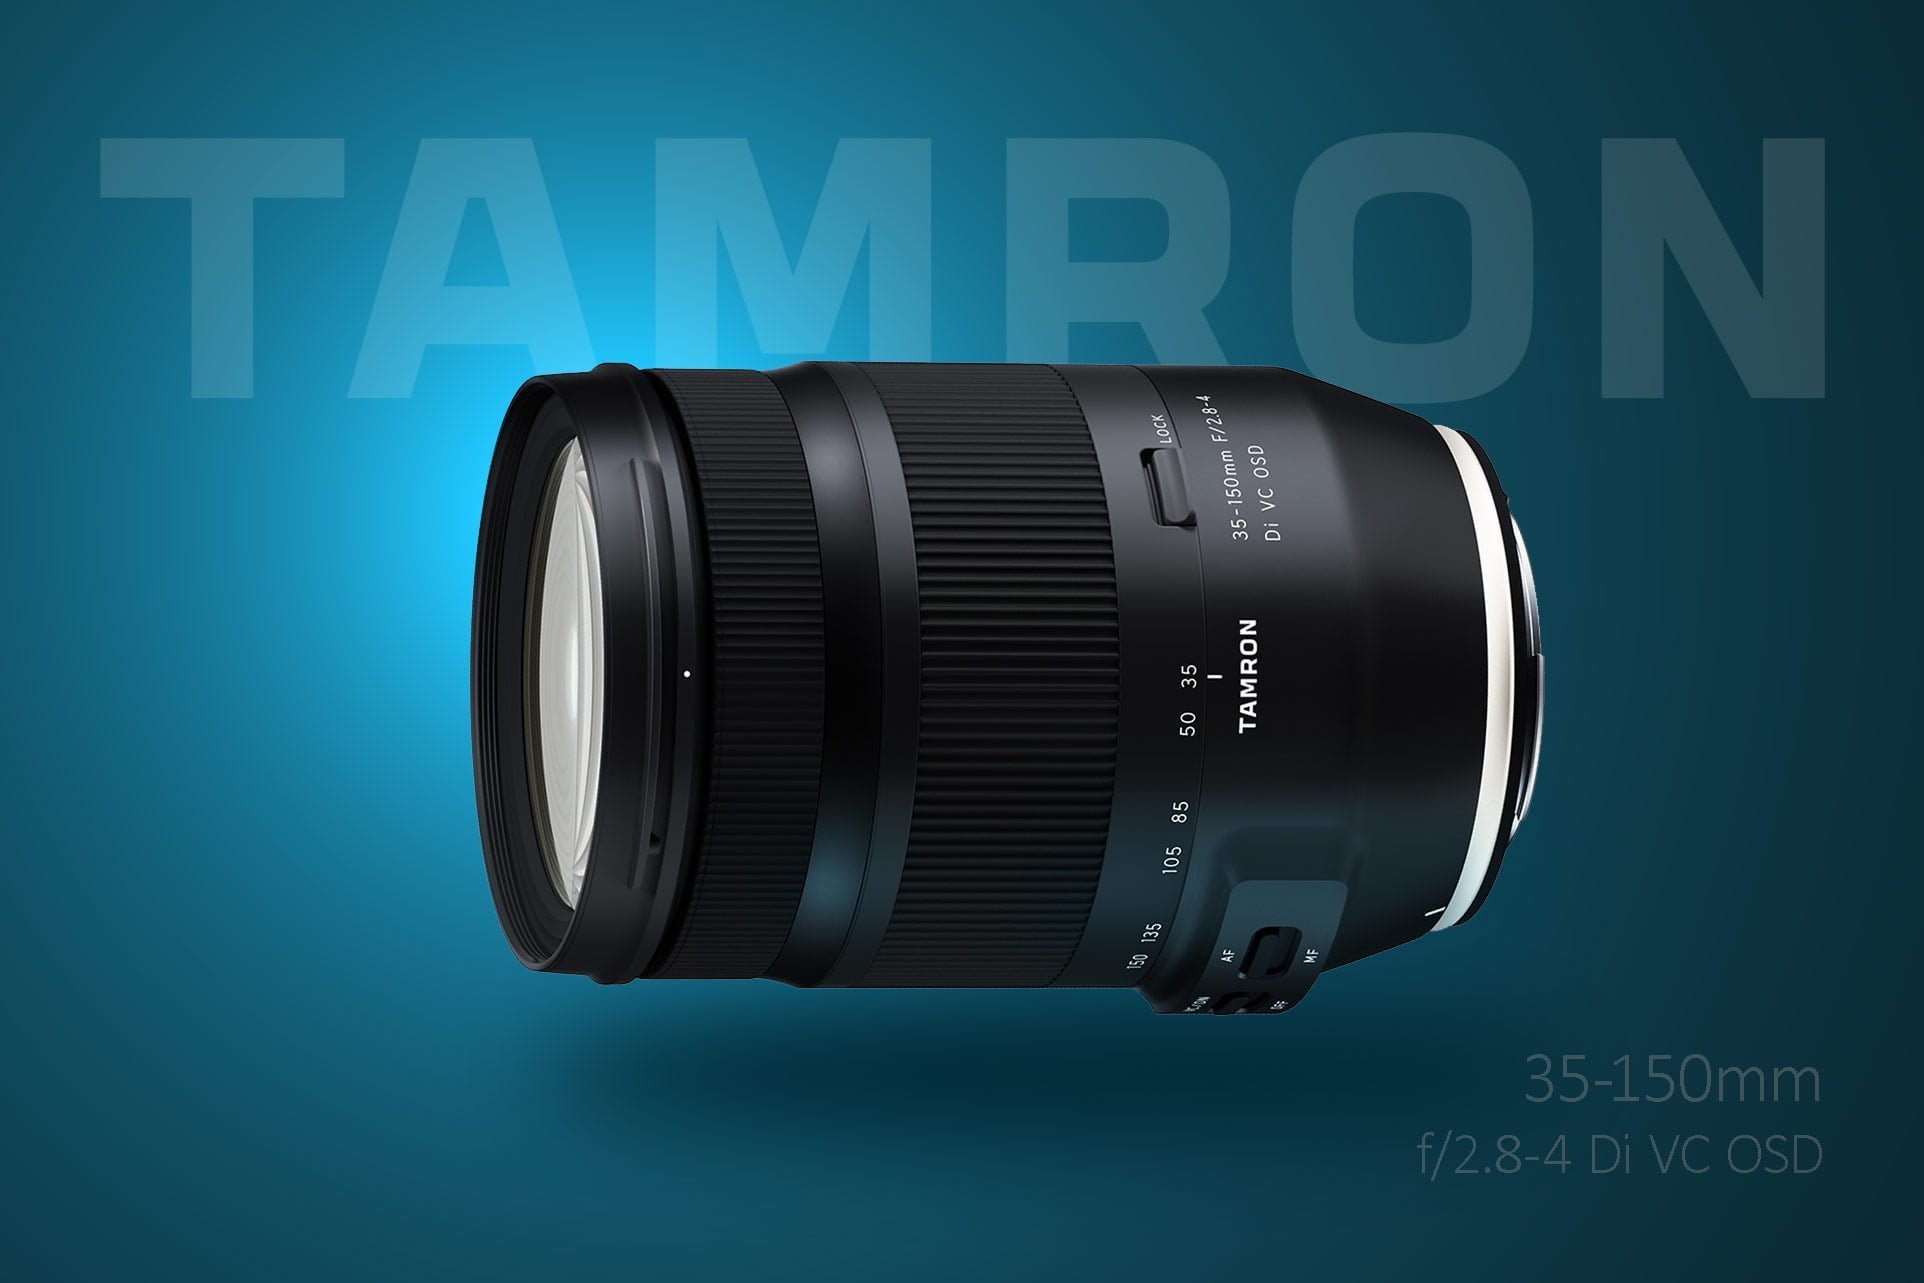 New Tamron 35 150 F 2 8 4 Price And Availability Light And Matter